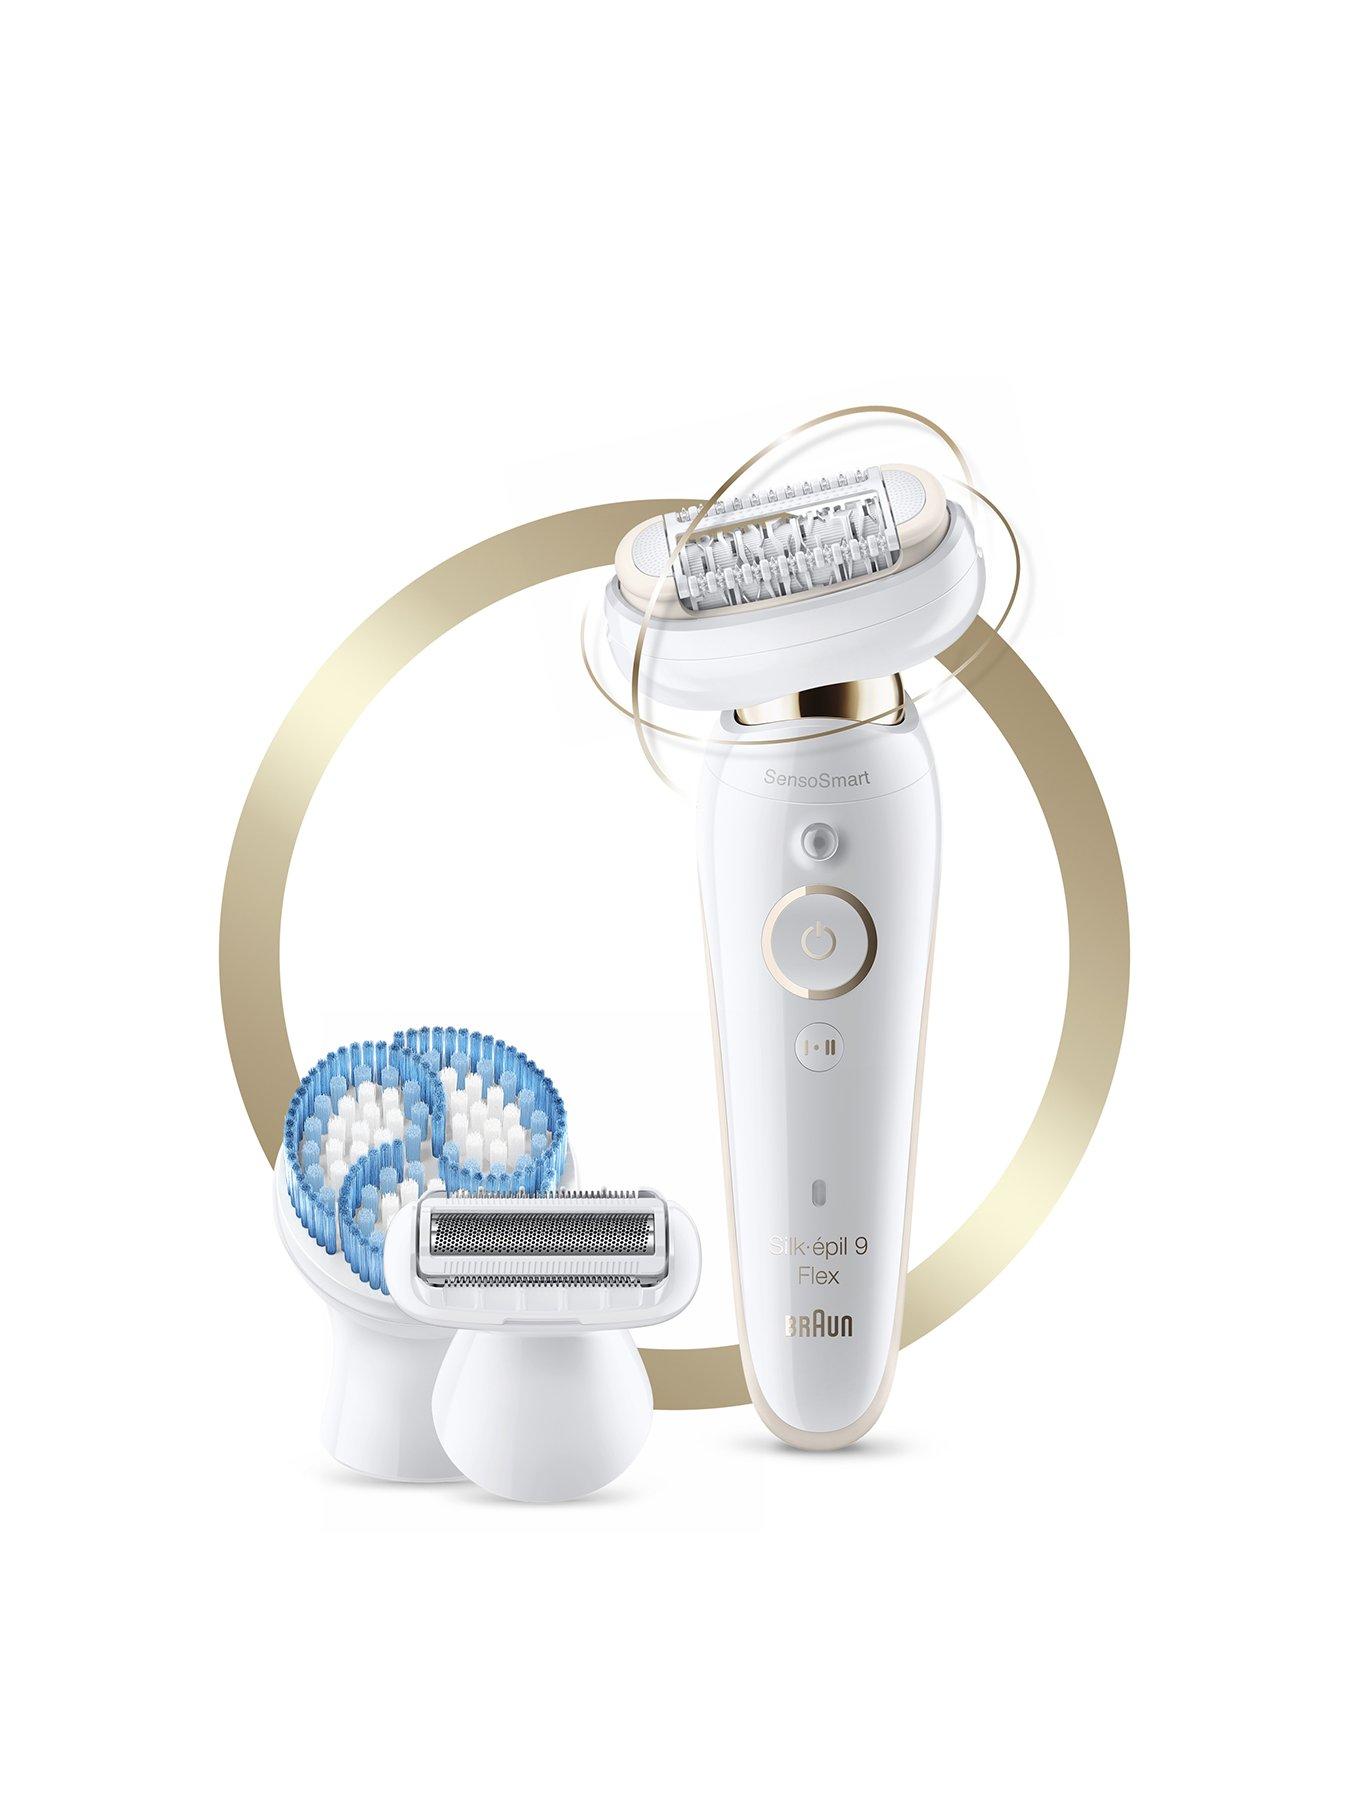 Braun Silk-Epil 9 ,Wet and Dry Epilator with 8 extras included Braun  FaceSpa - eXtra